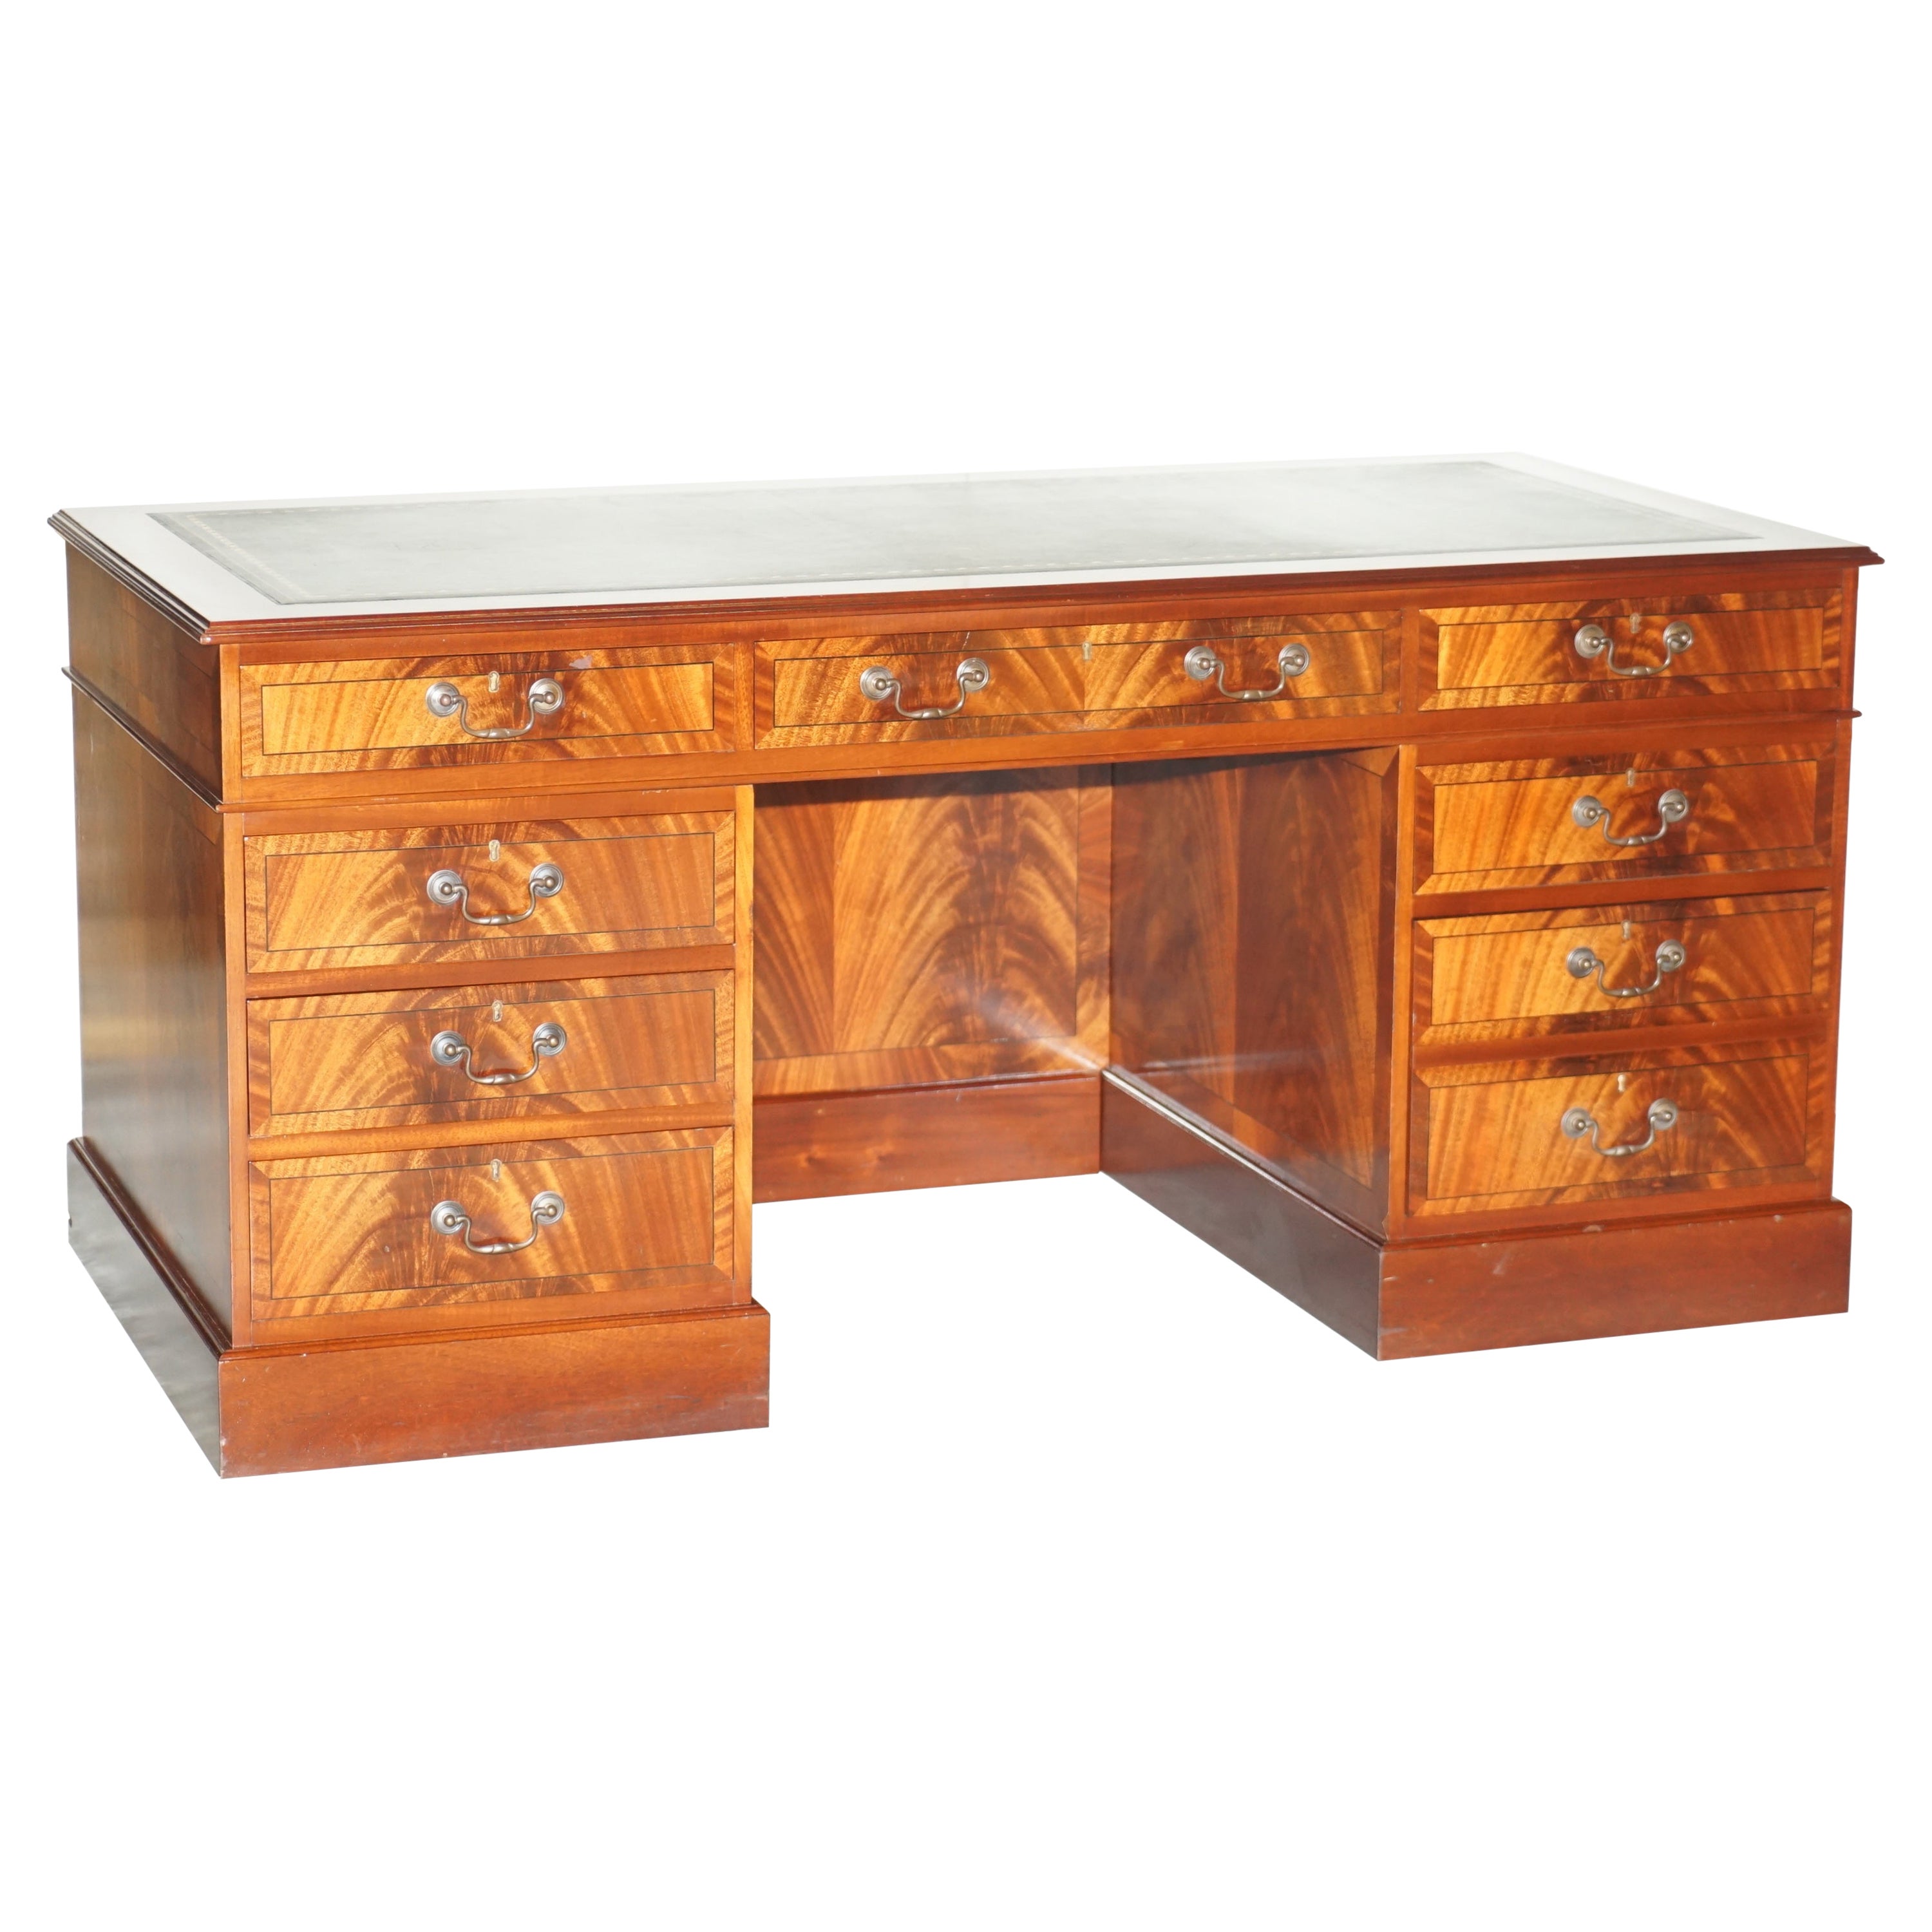 ANTIQUE FLAMED HARDWOOD DESK FROM PRINCESS DIANA'S FAMiLY HOME SPENCER HOUSE For Sale